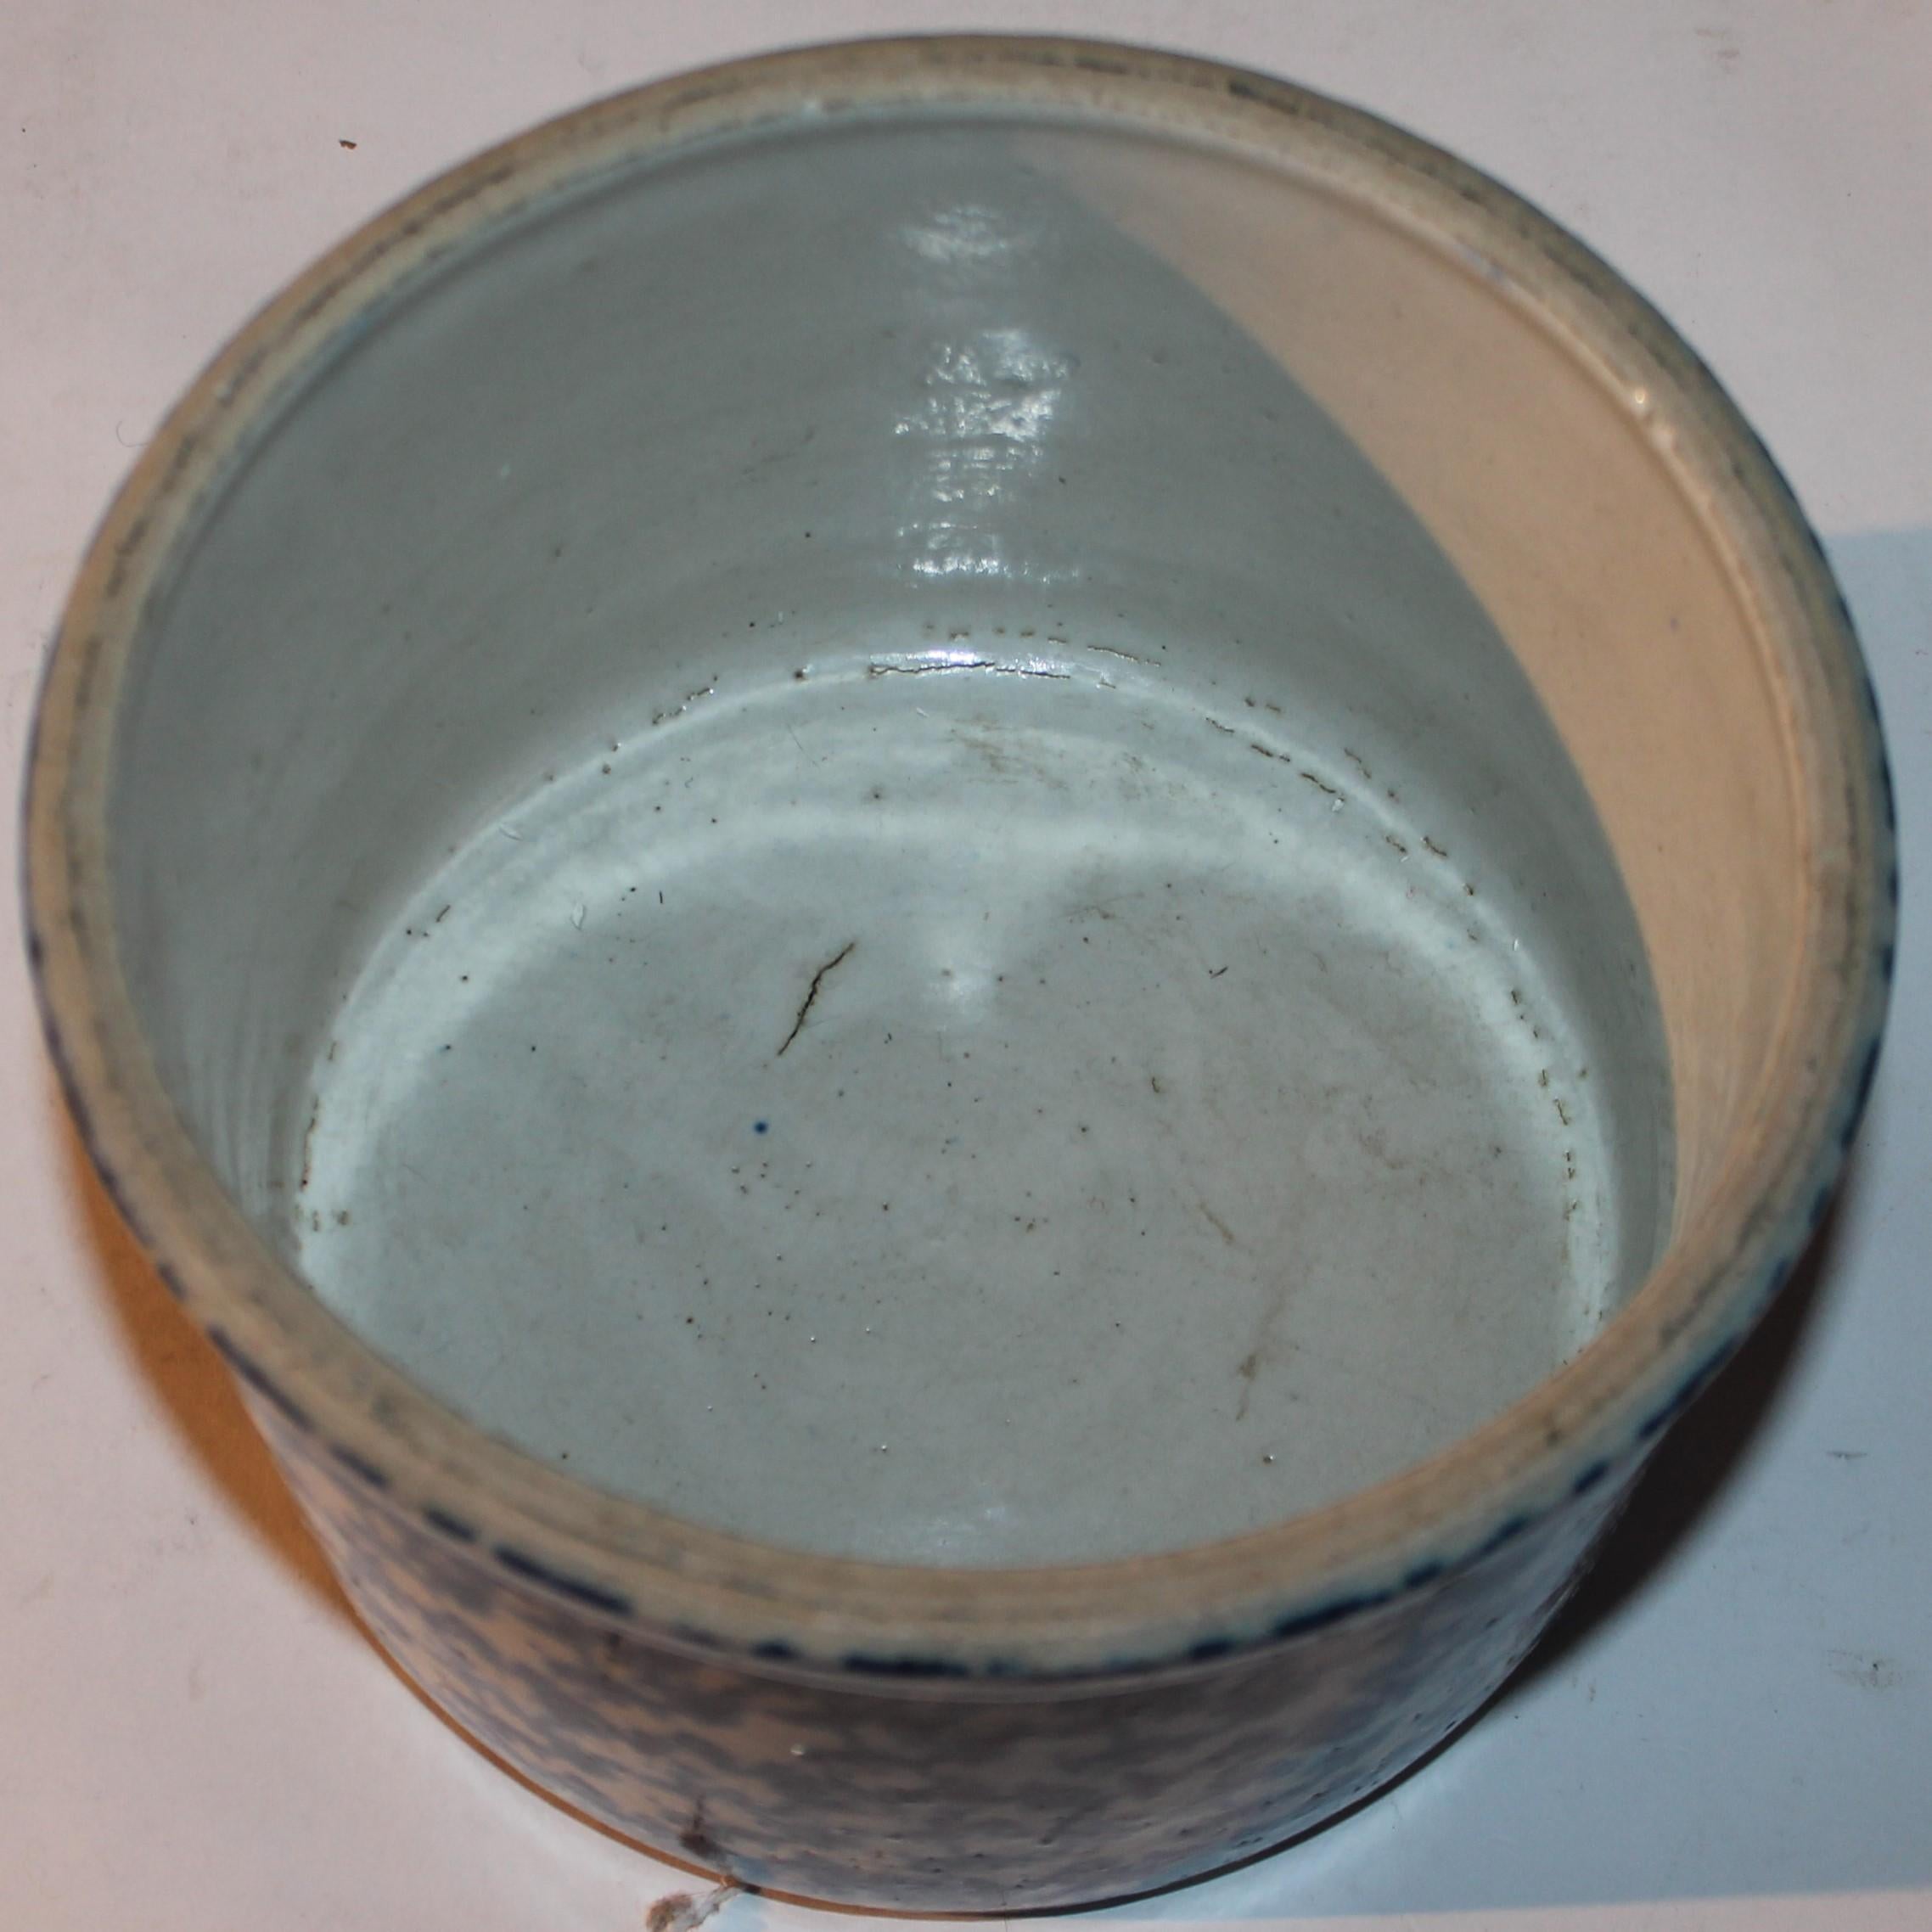 19th C over sized spongeware butter crock. Very nice color and good condition.